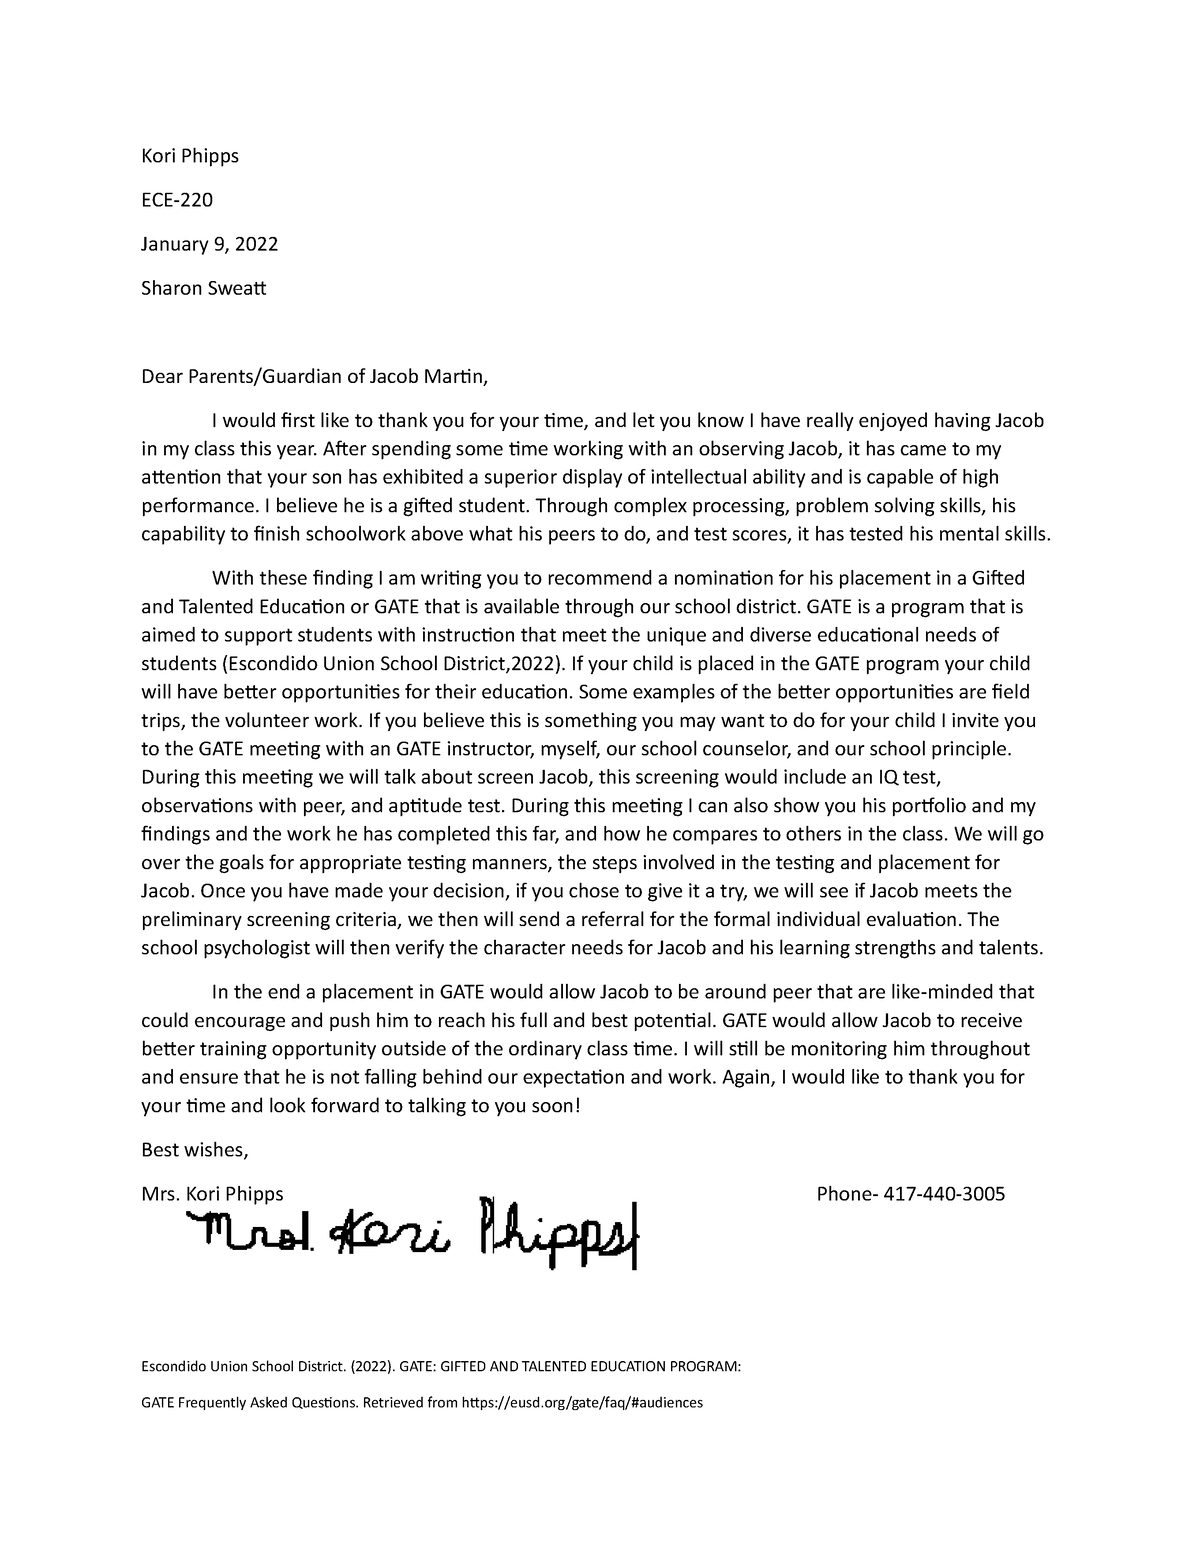 Gifted and Talented Letter ECE-220 - Kori Phipps ECE- January 9, 2022 ...